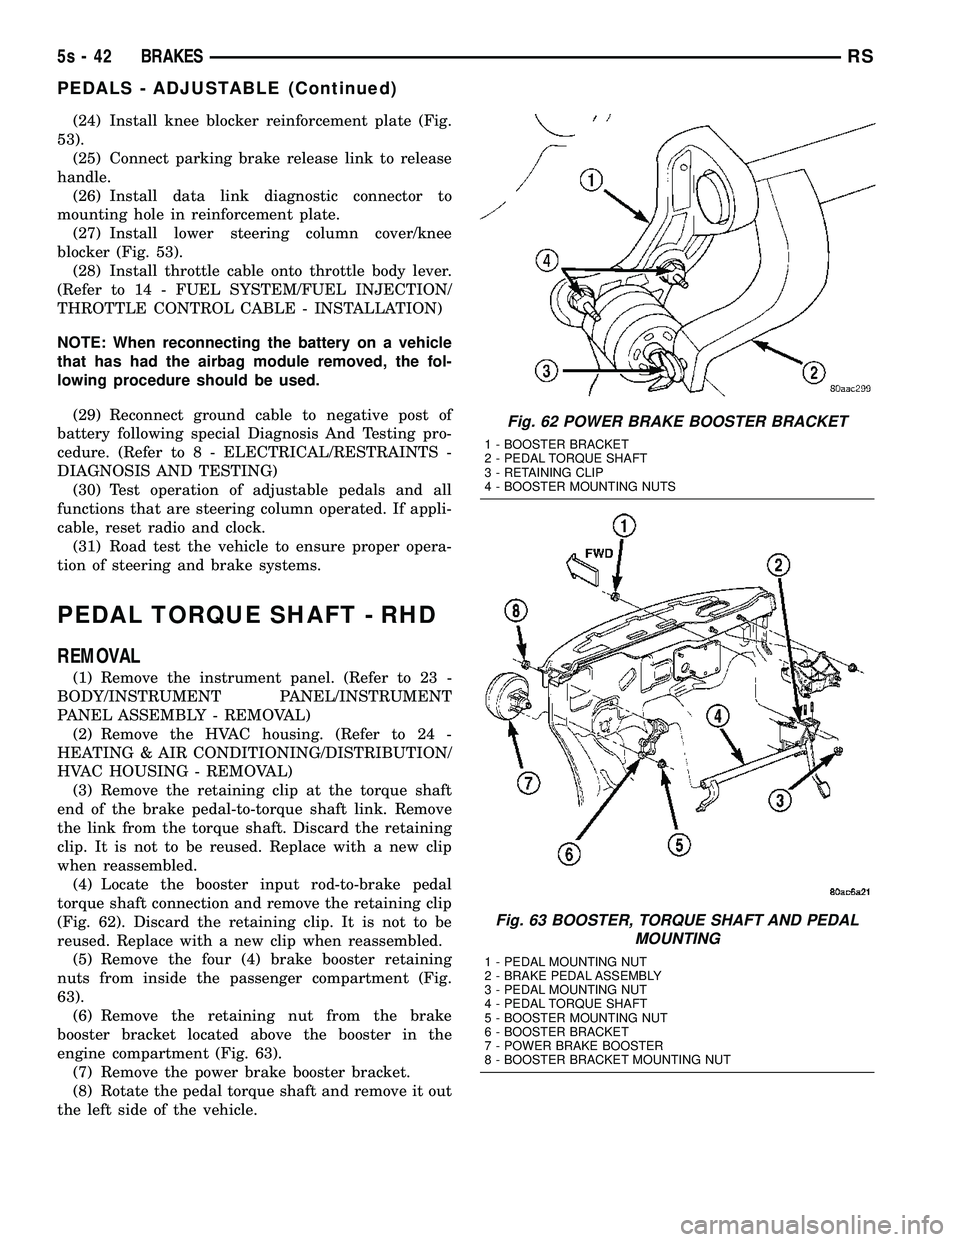 DODGE TOWN AND COUNTRY 2004  Service Manual (24) Install knee blocker reinforcement plate (Fig.
53). (25) Connect parking brake release link to release
handle. (26) Install data link diagnostic connector to
mounting hole in reinforcement plate.